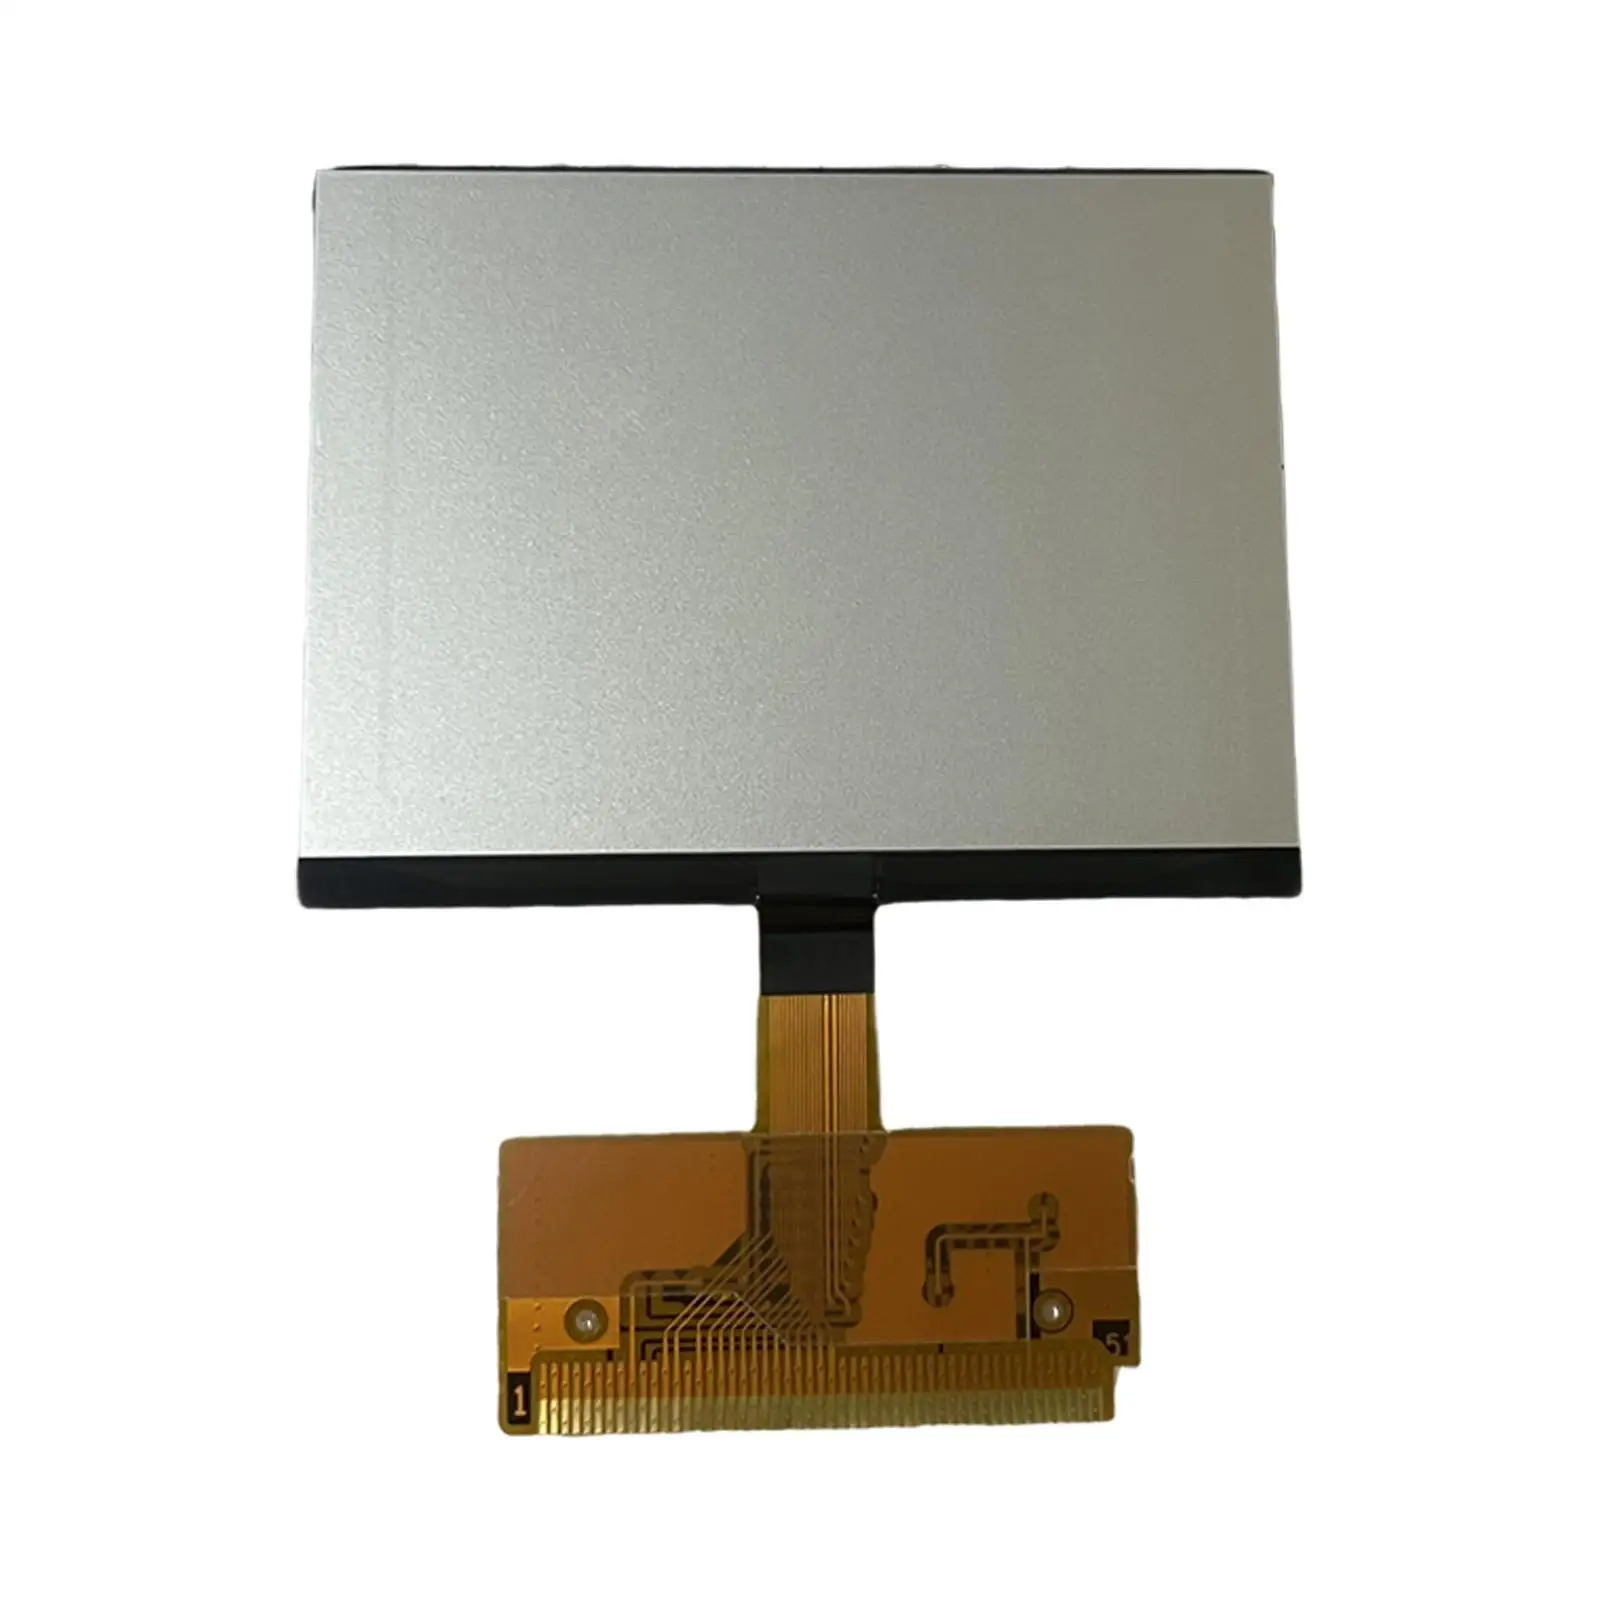 LCD Display Replacement Durable Vehicle Spare Parts Professional for Audi A3 A4 Vdo Convenient Installation 3inchx2.24inch